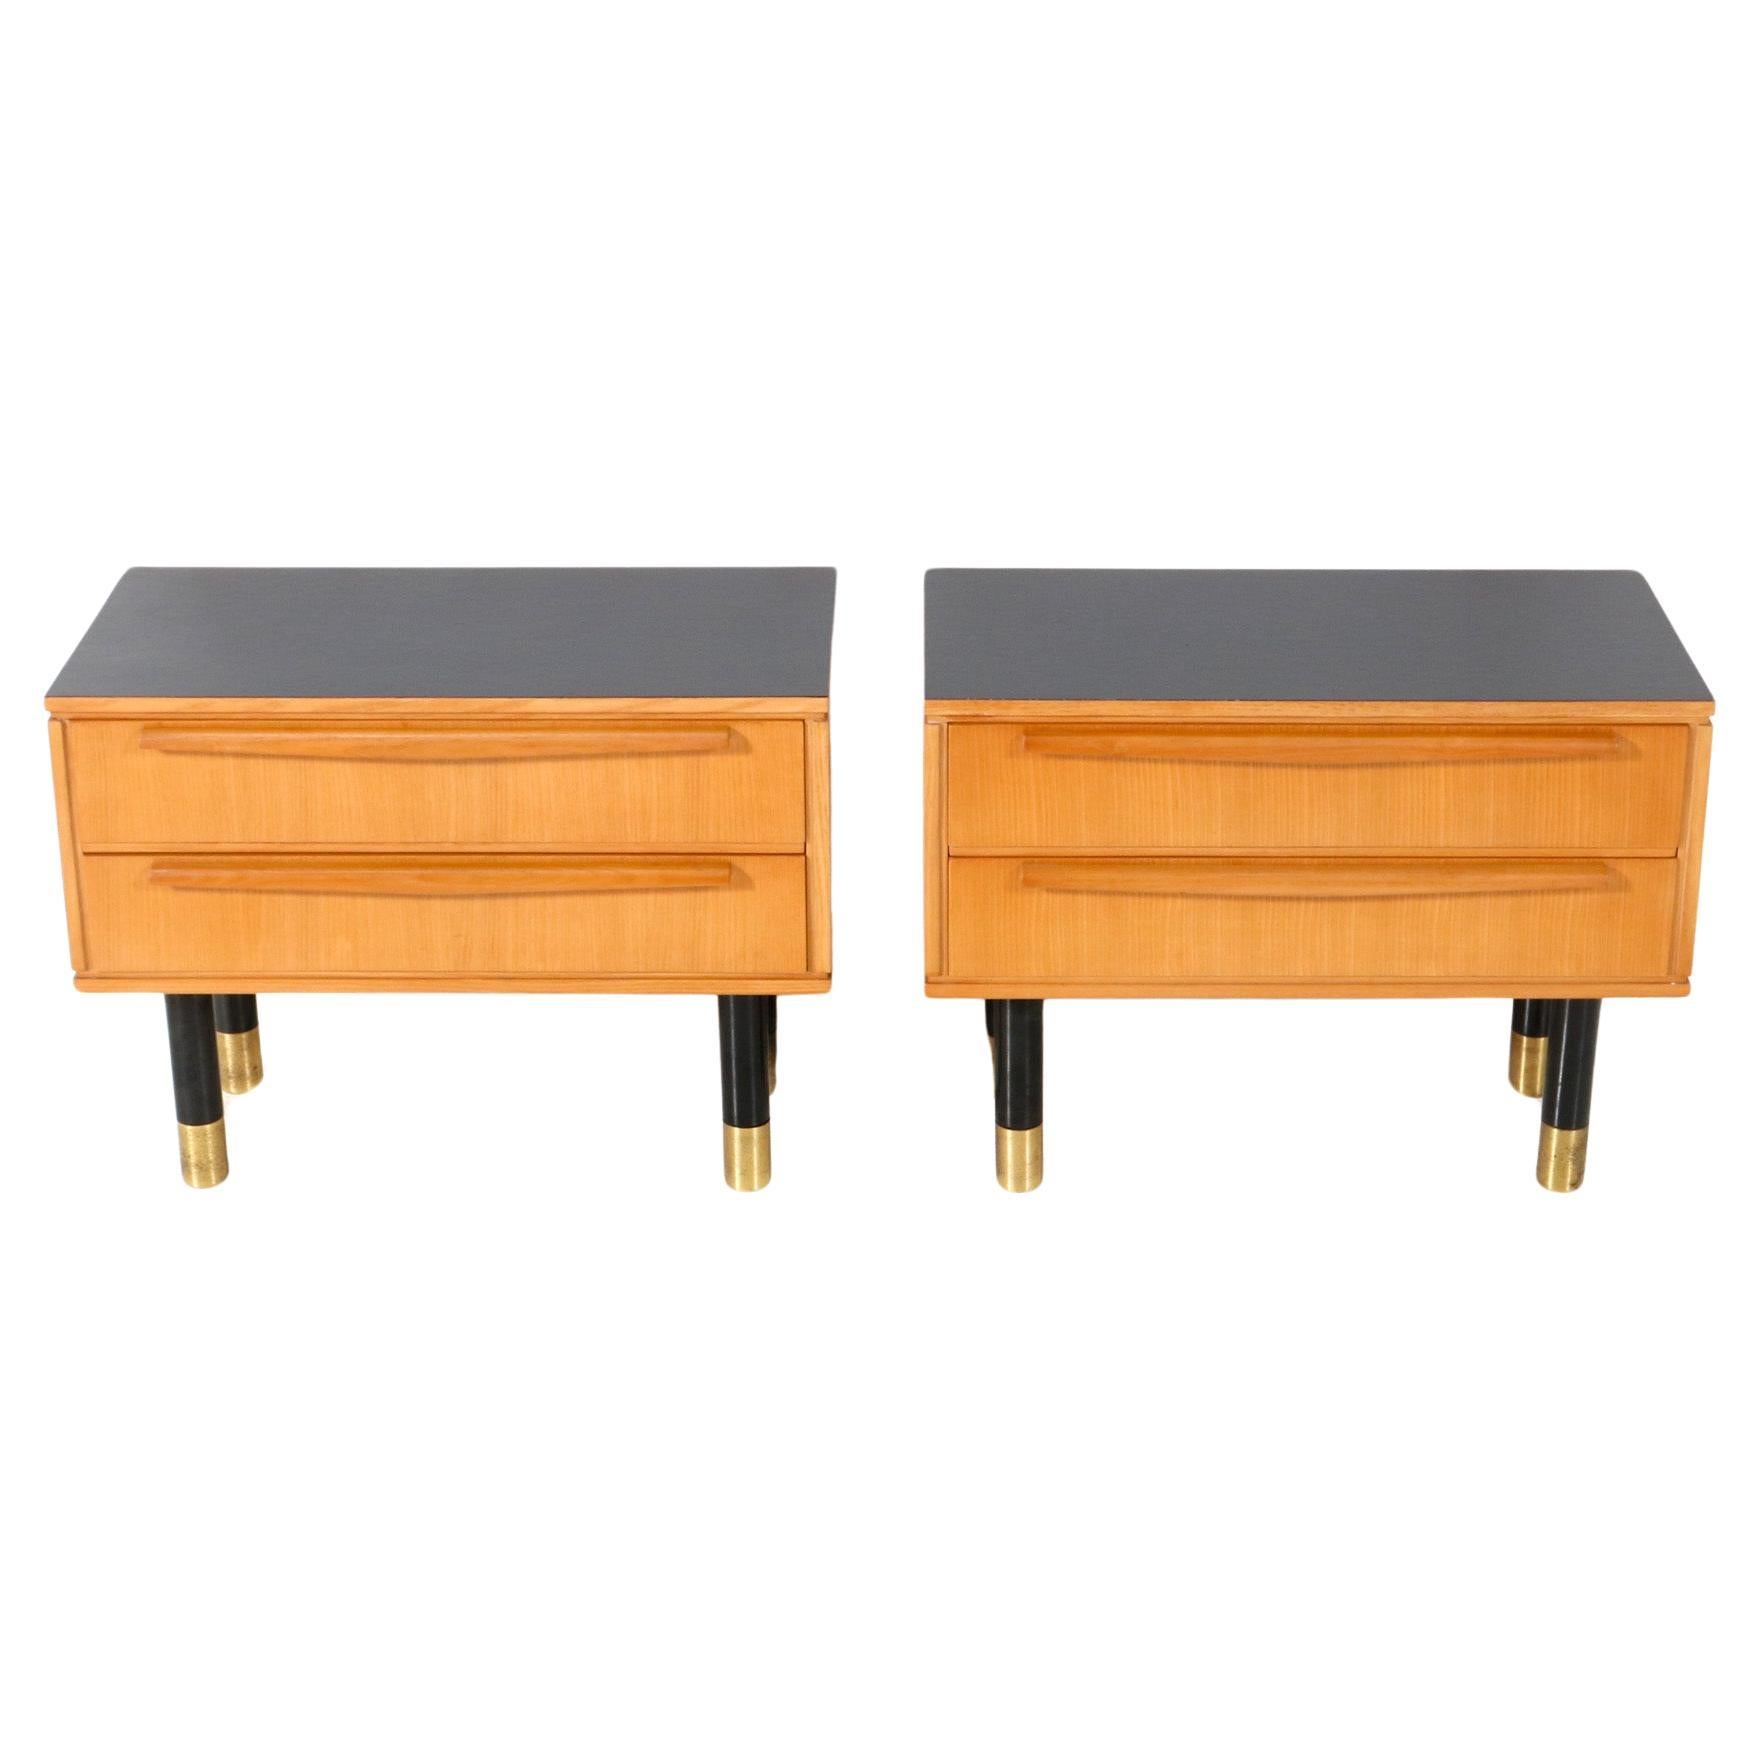 Two Ash Mid-Century Modern Nightstands or Bedside Tables, 1950s